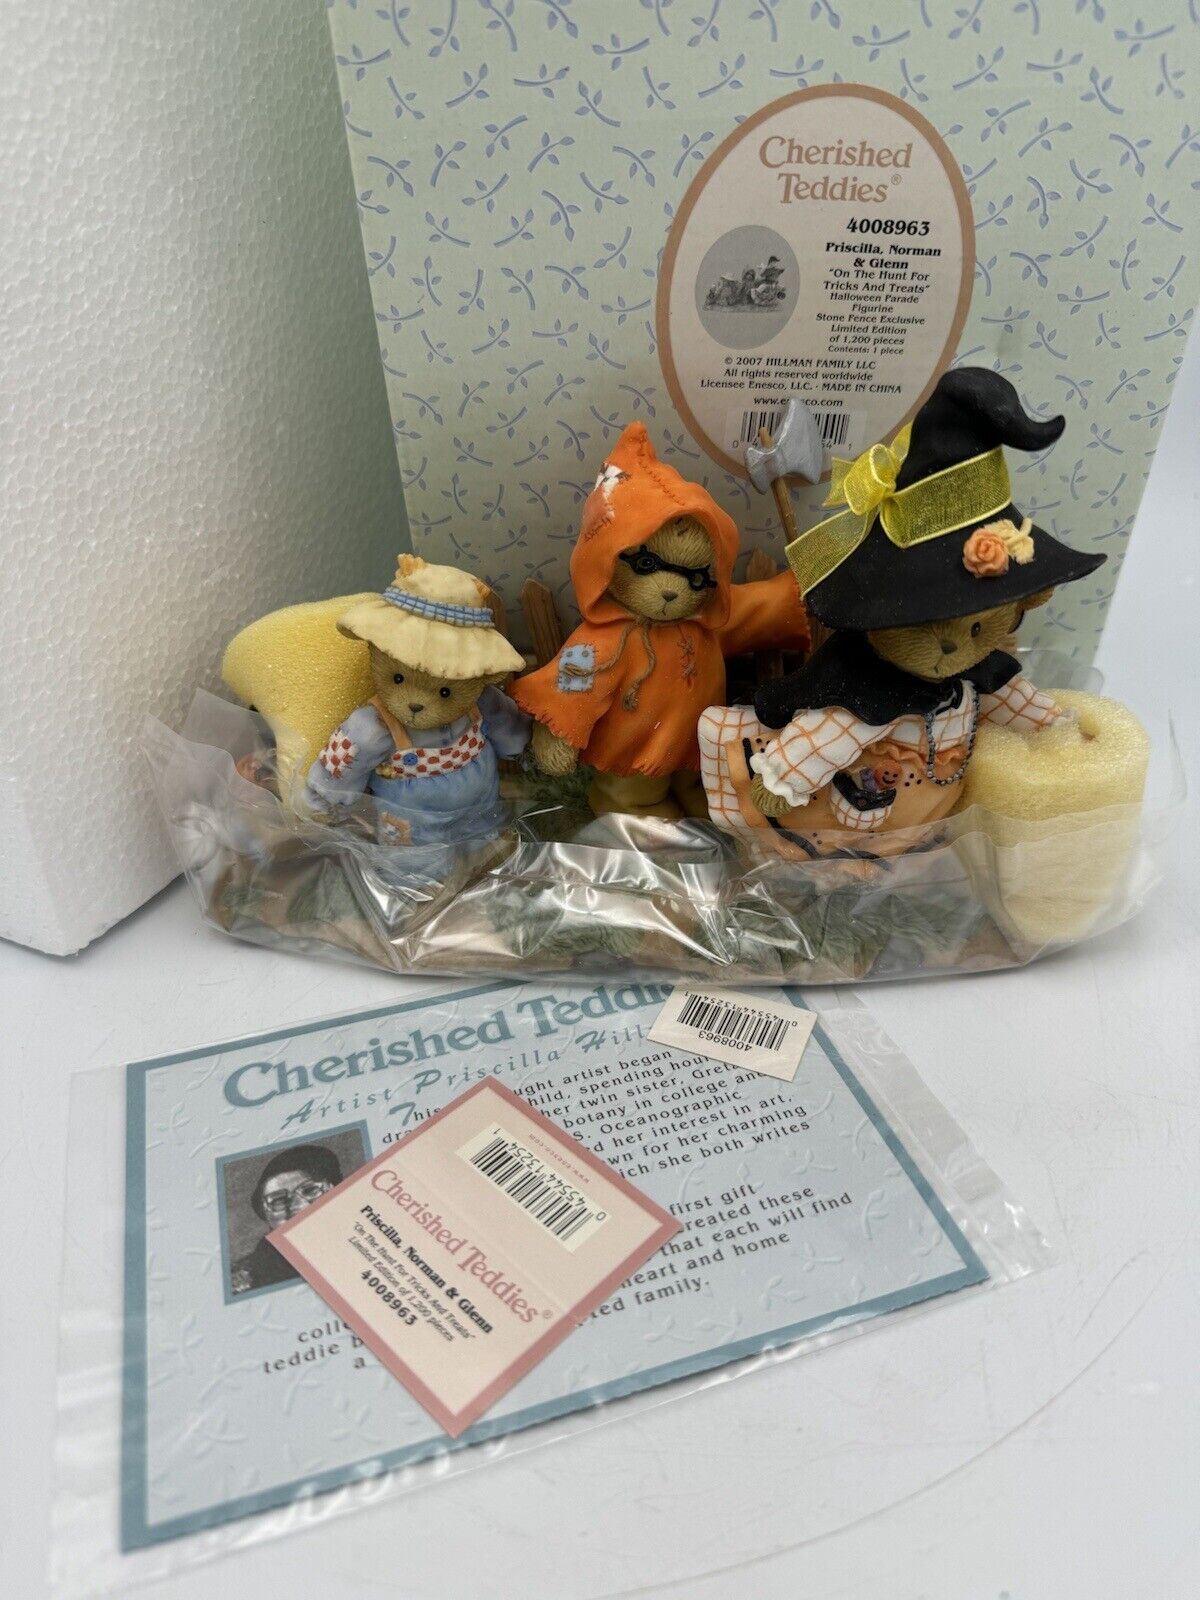 Cherished Teddies Limited Edition “On The Hunt For Tricks And Treats” 4008963